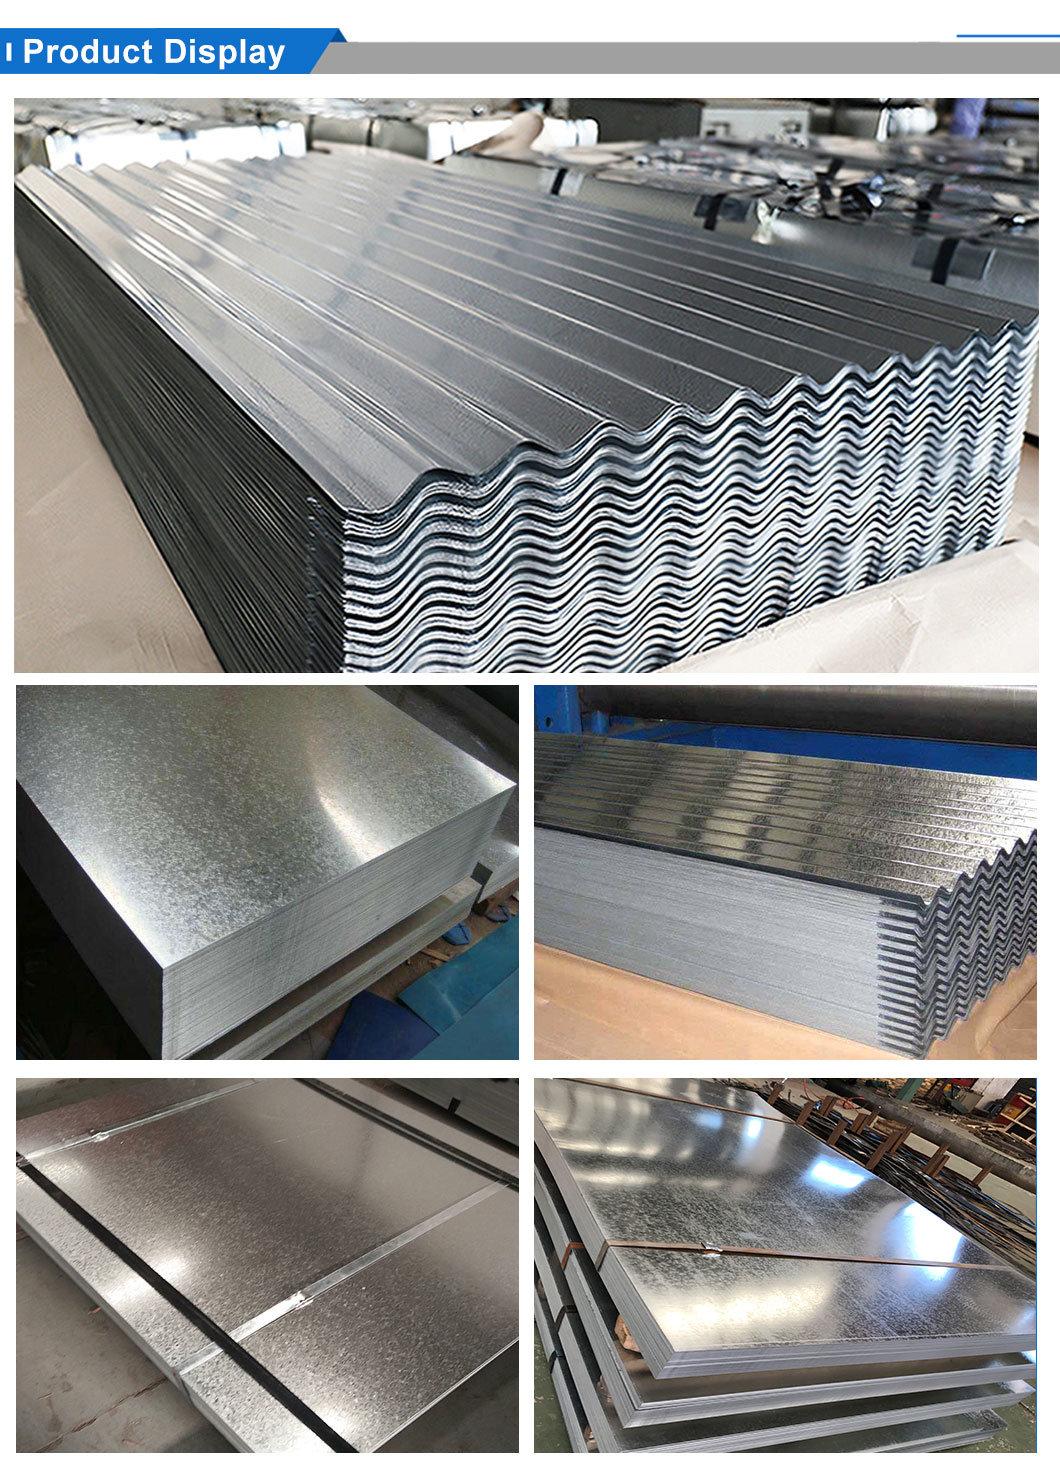 Roofing Material Metal Plate 24 Gauge Galvanized Stainless Steel Sheet